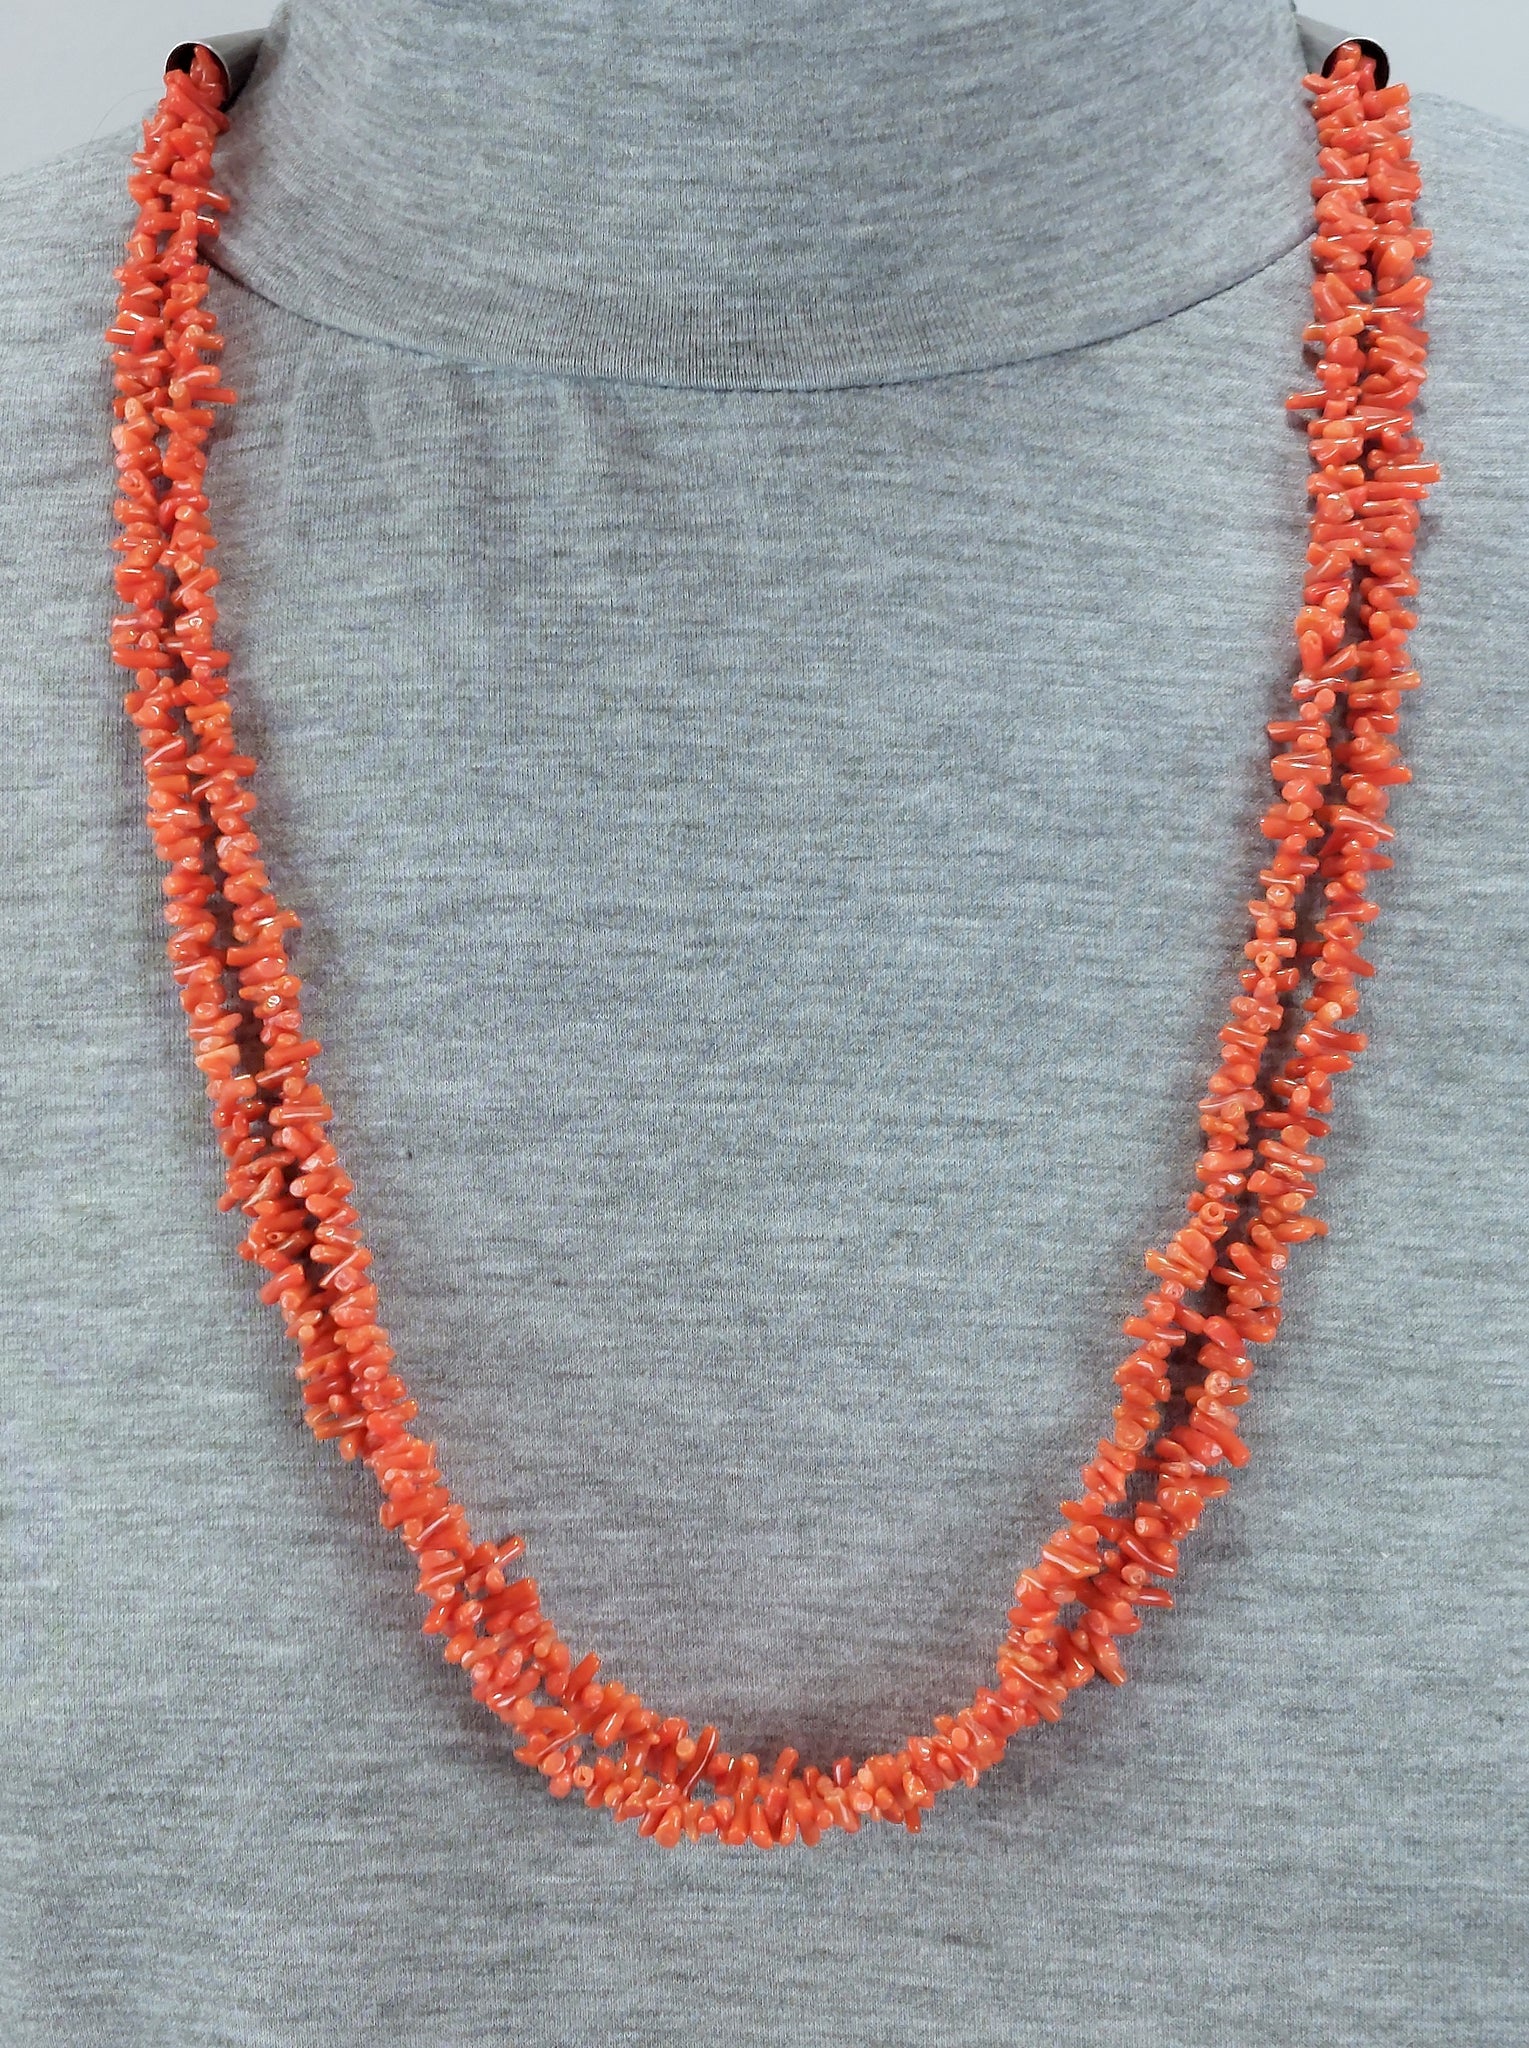 Antique 14K Coral Necklace with Carved Bacchus head – Cris Notti Jewels